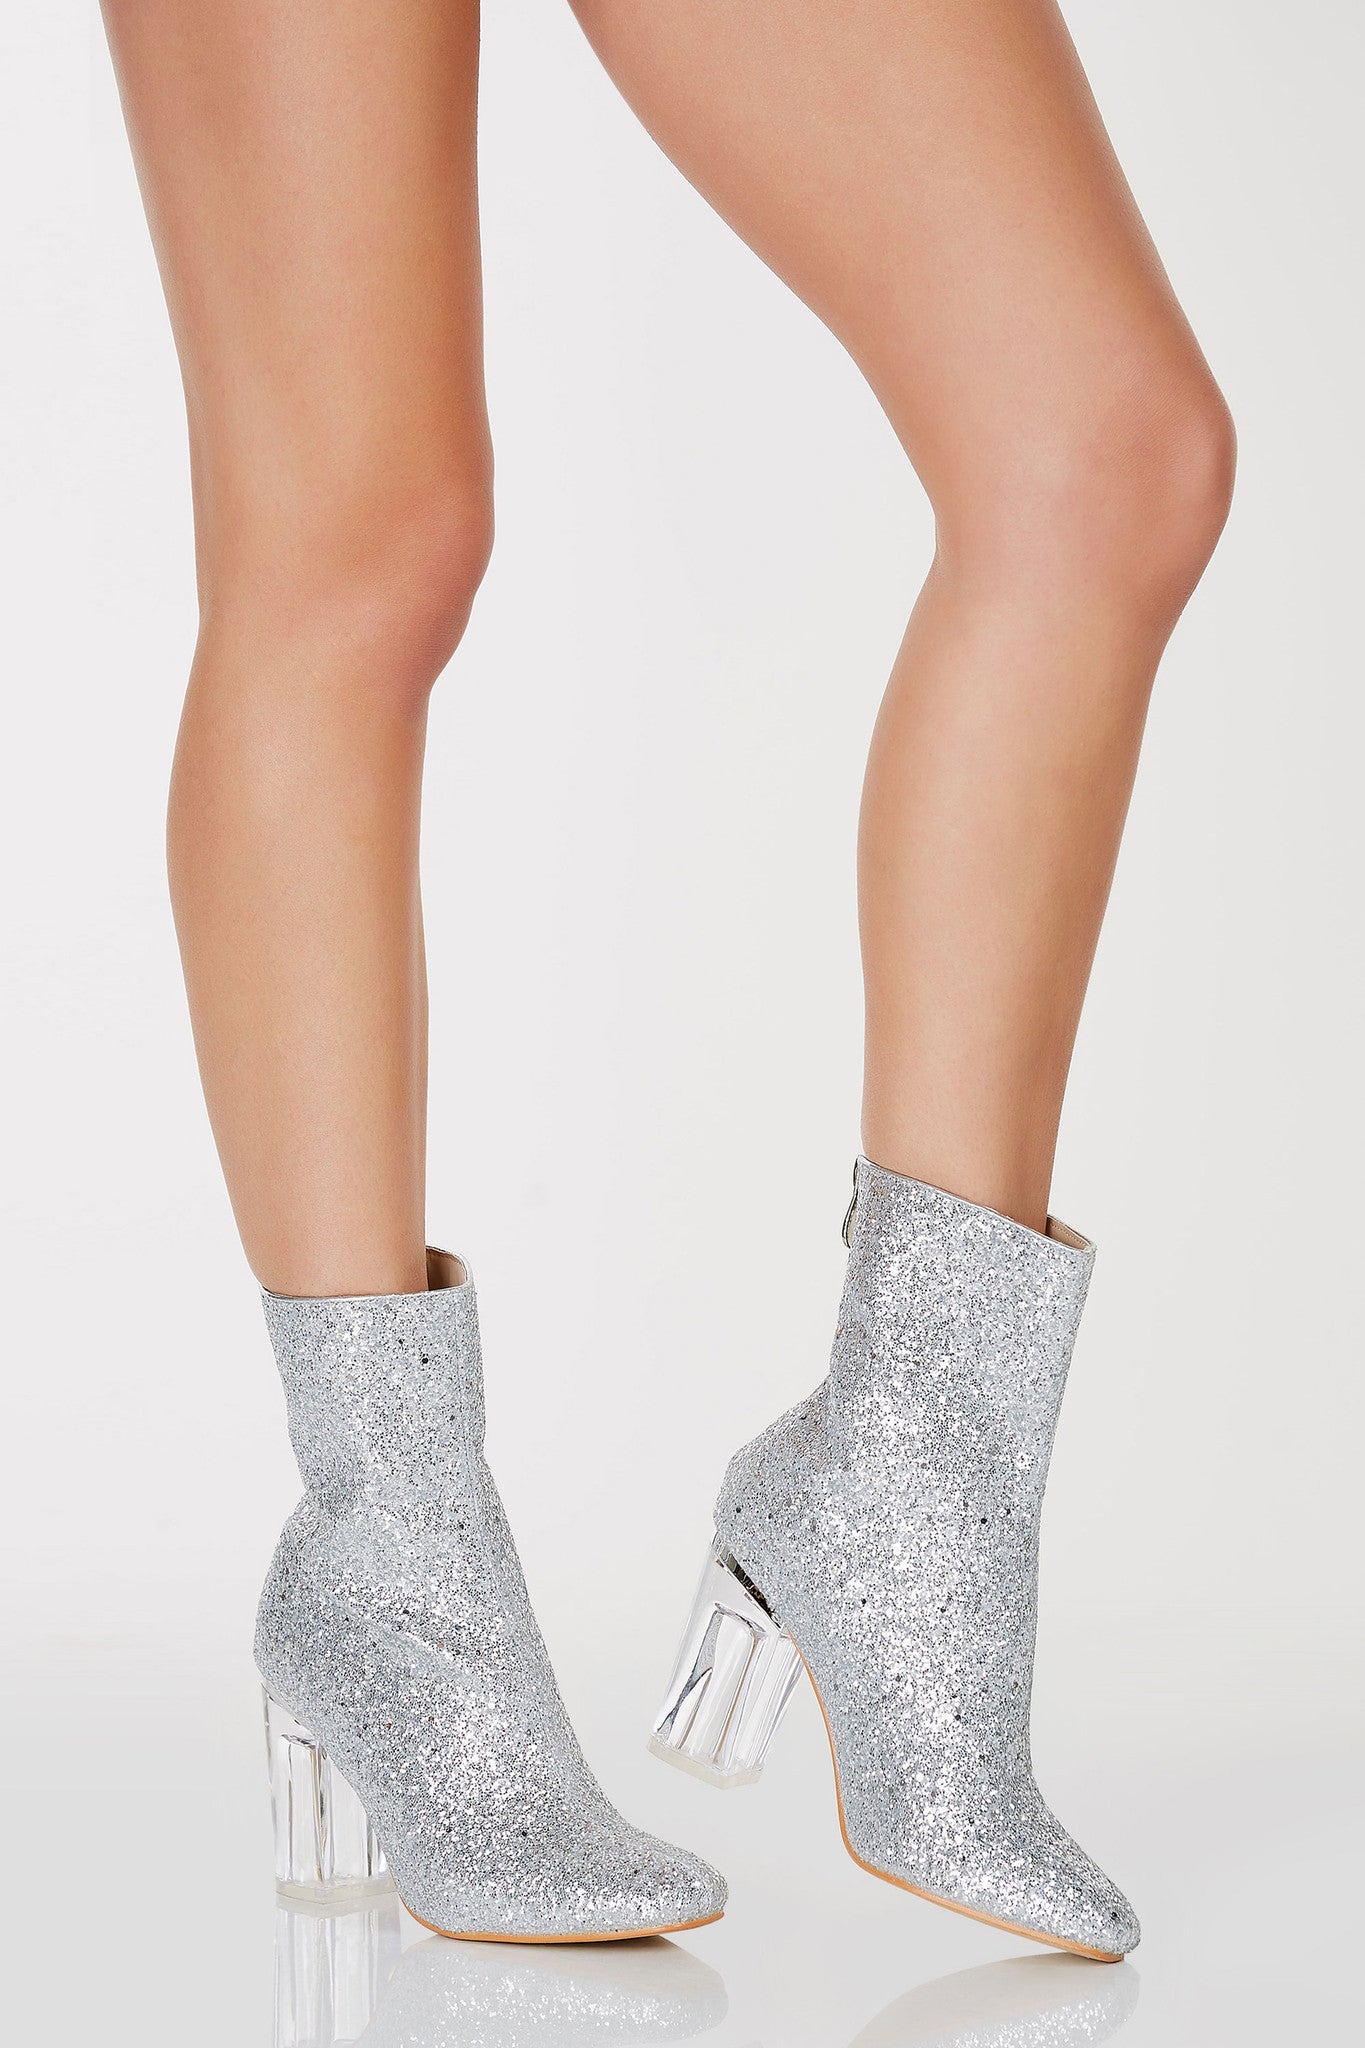 /Above the ankle/Squared off toe/Back zip closure/Clear block heels/Glitter finish exterior